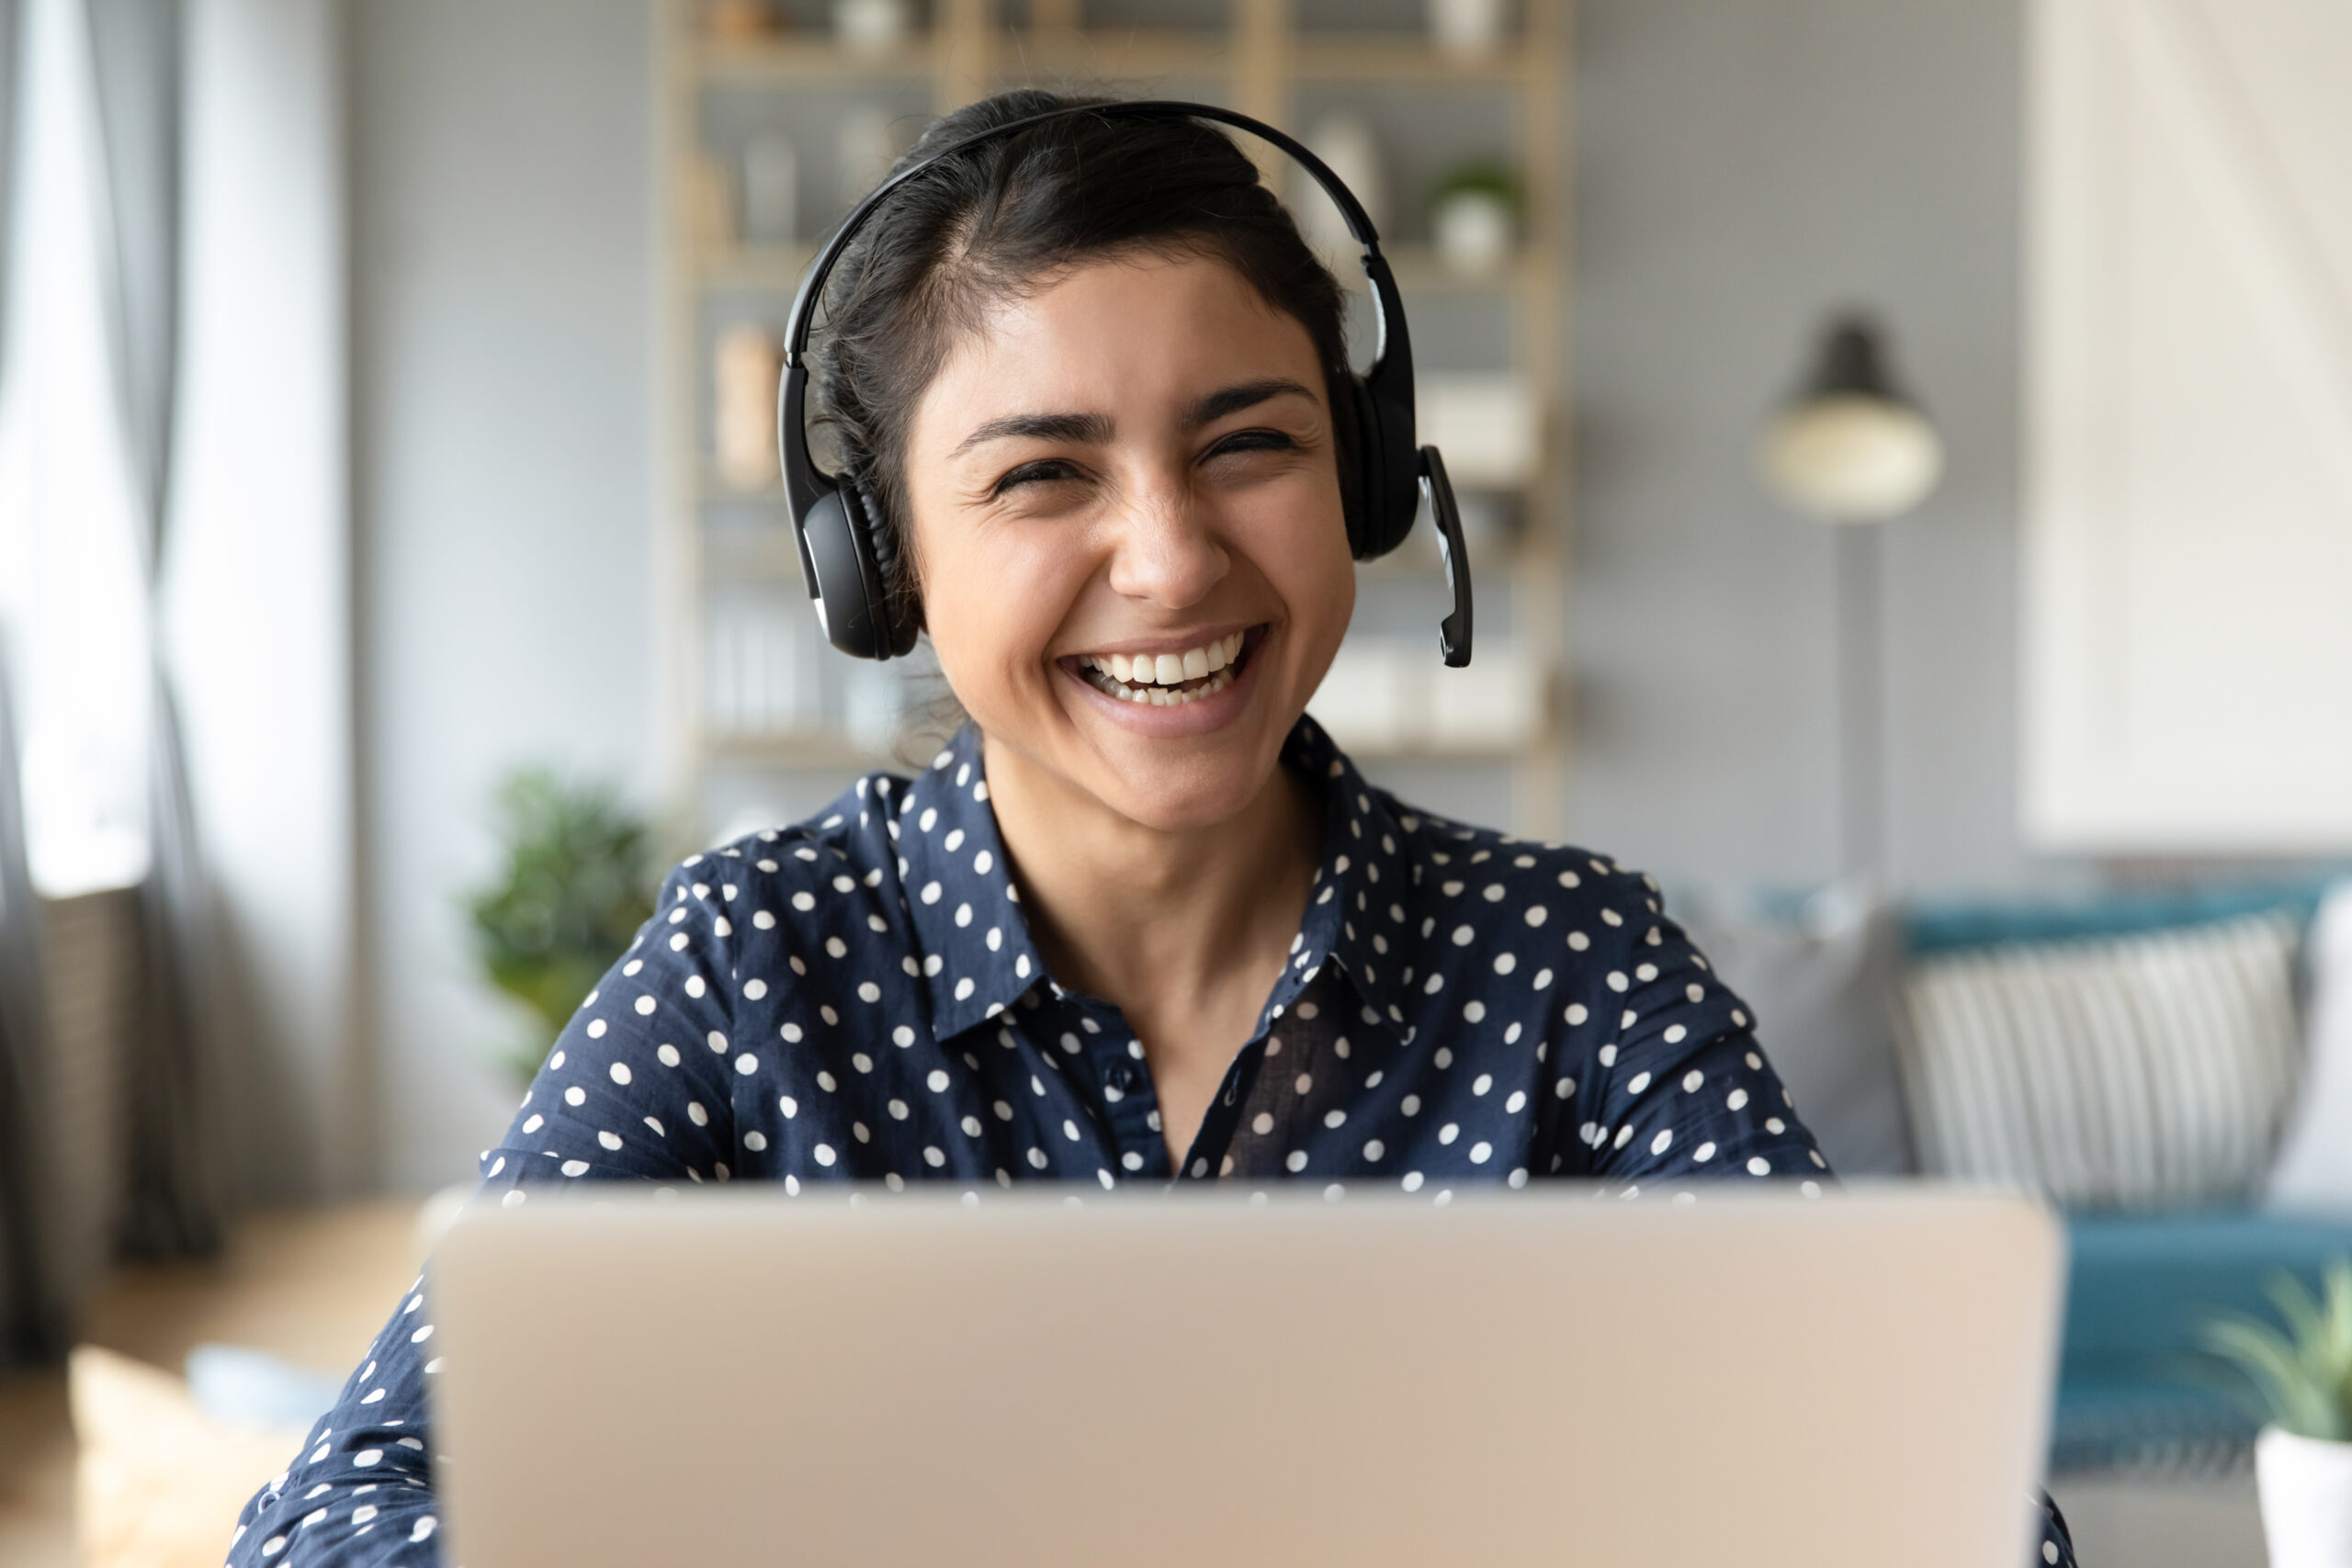 Head shot portrait smiling Indian woman wearing headphones posing for photo at workplace, happy excited female wearing headset looking at camera, sitting at desk with laptop, making video call